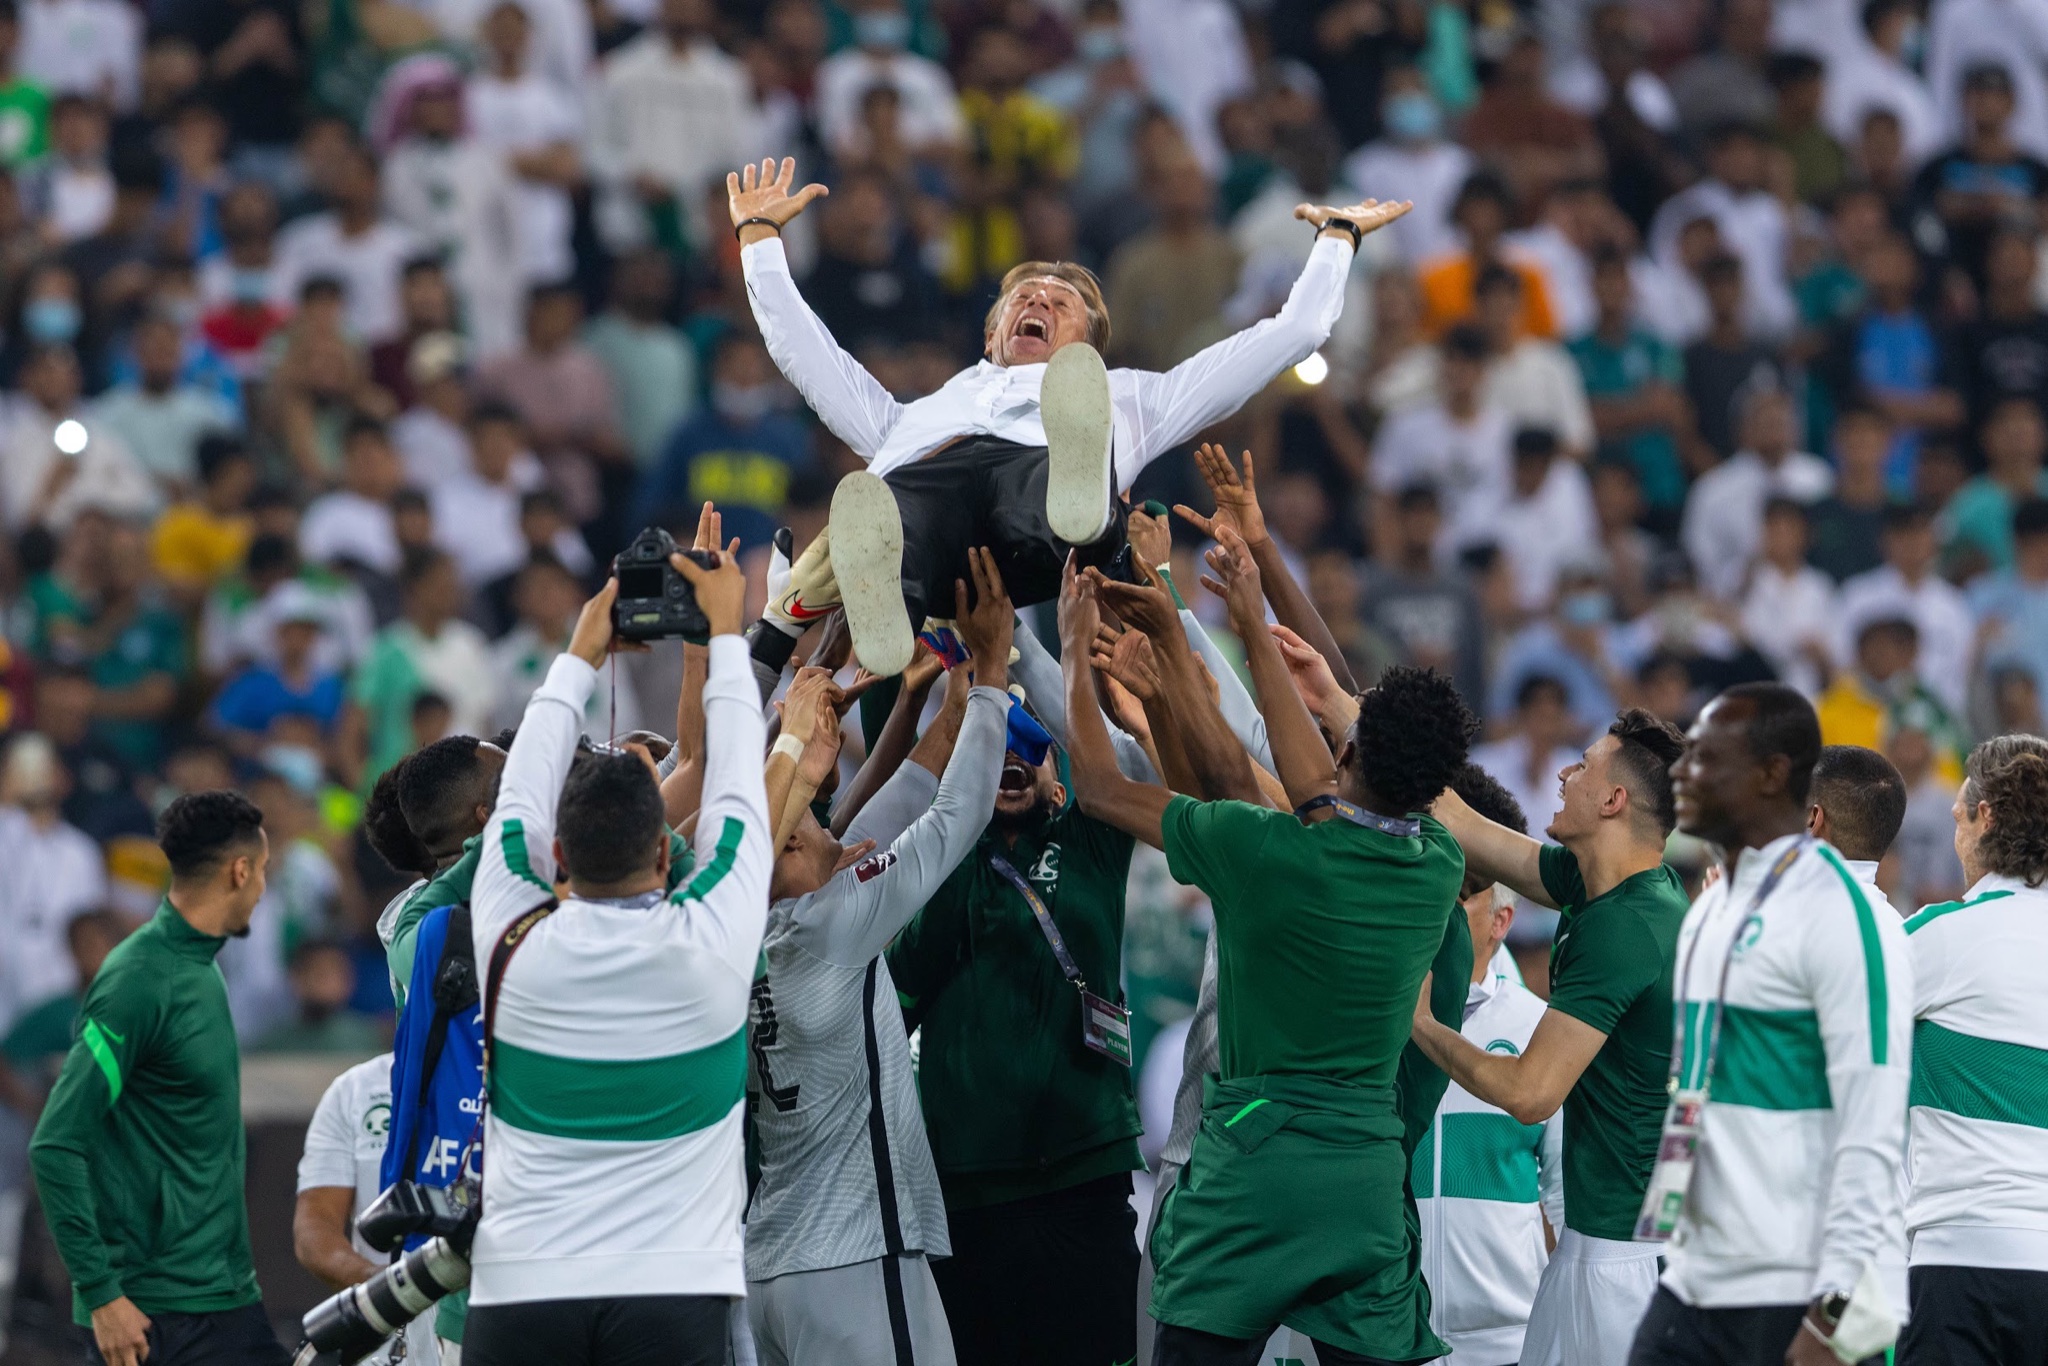 From cleaner to World Cup coach: Who is Saudi Arabia football